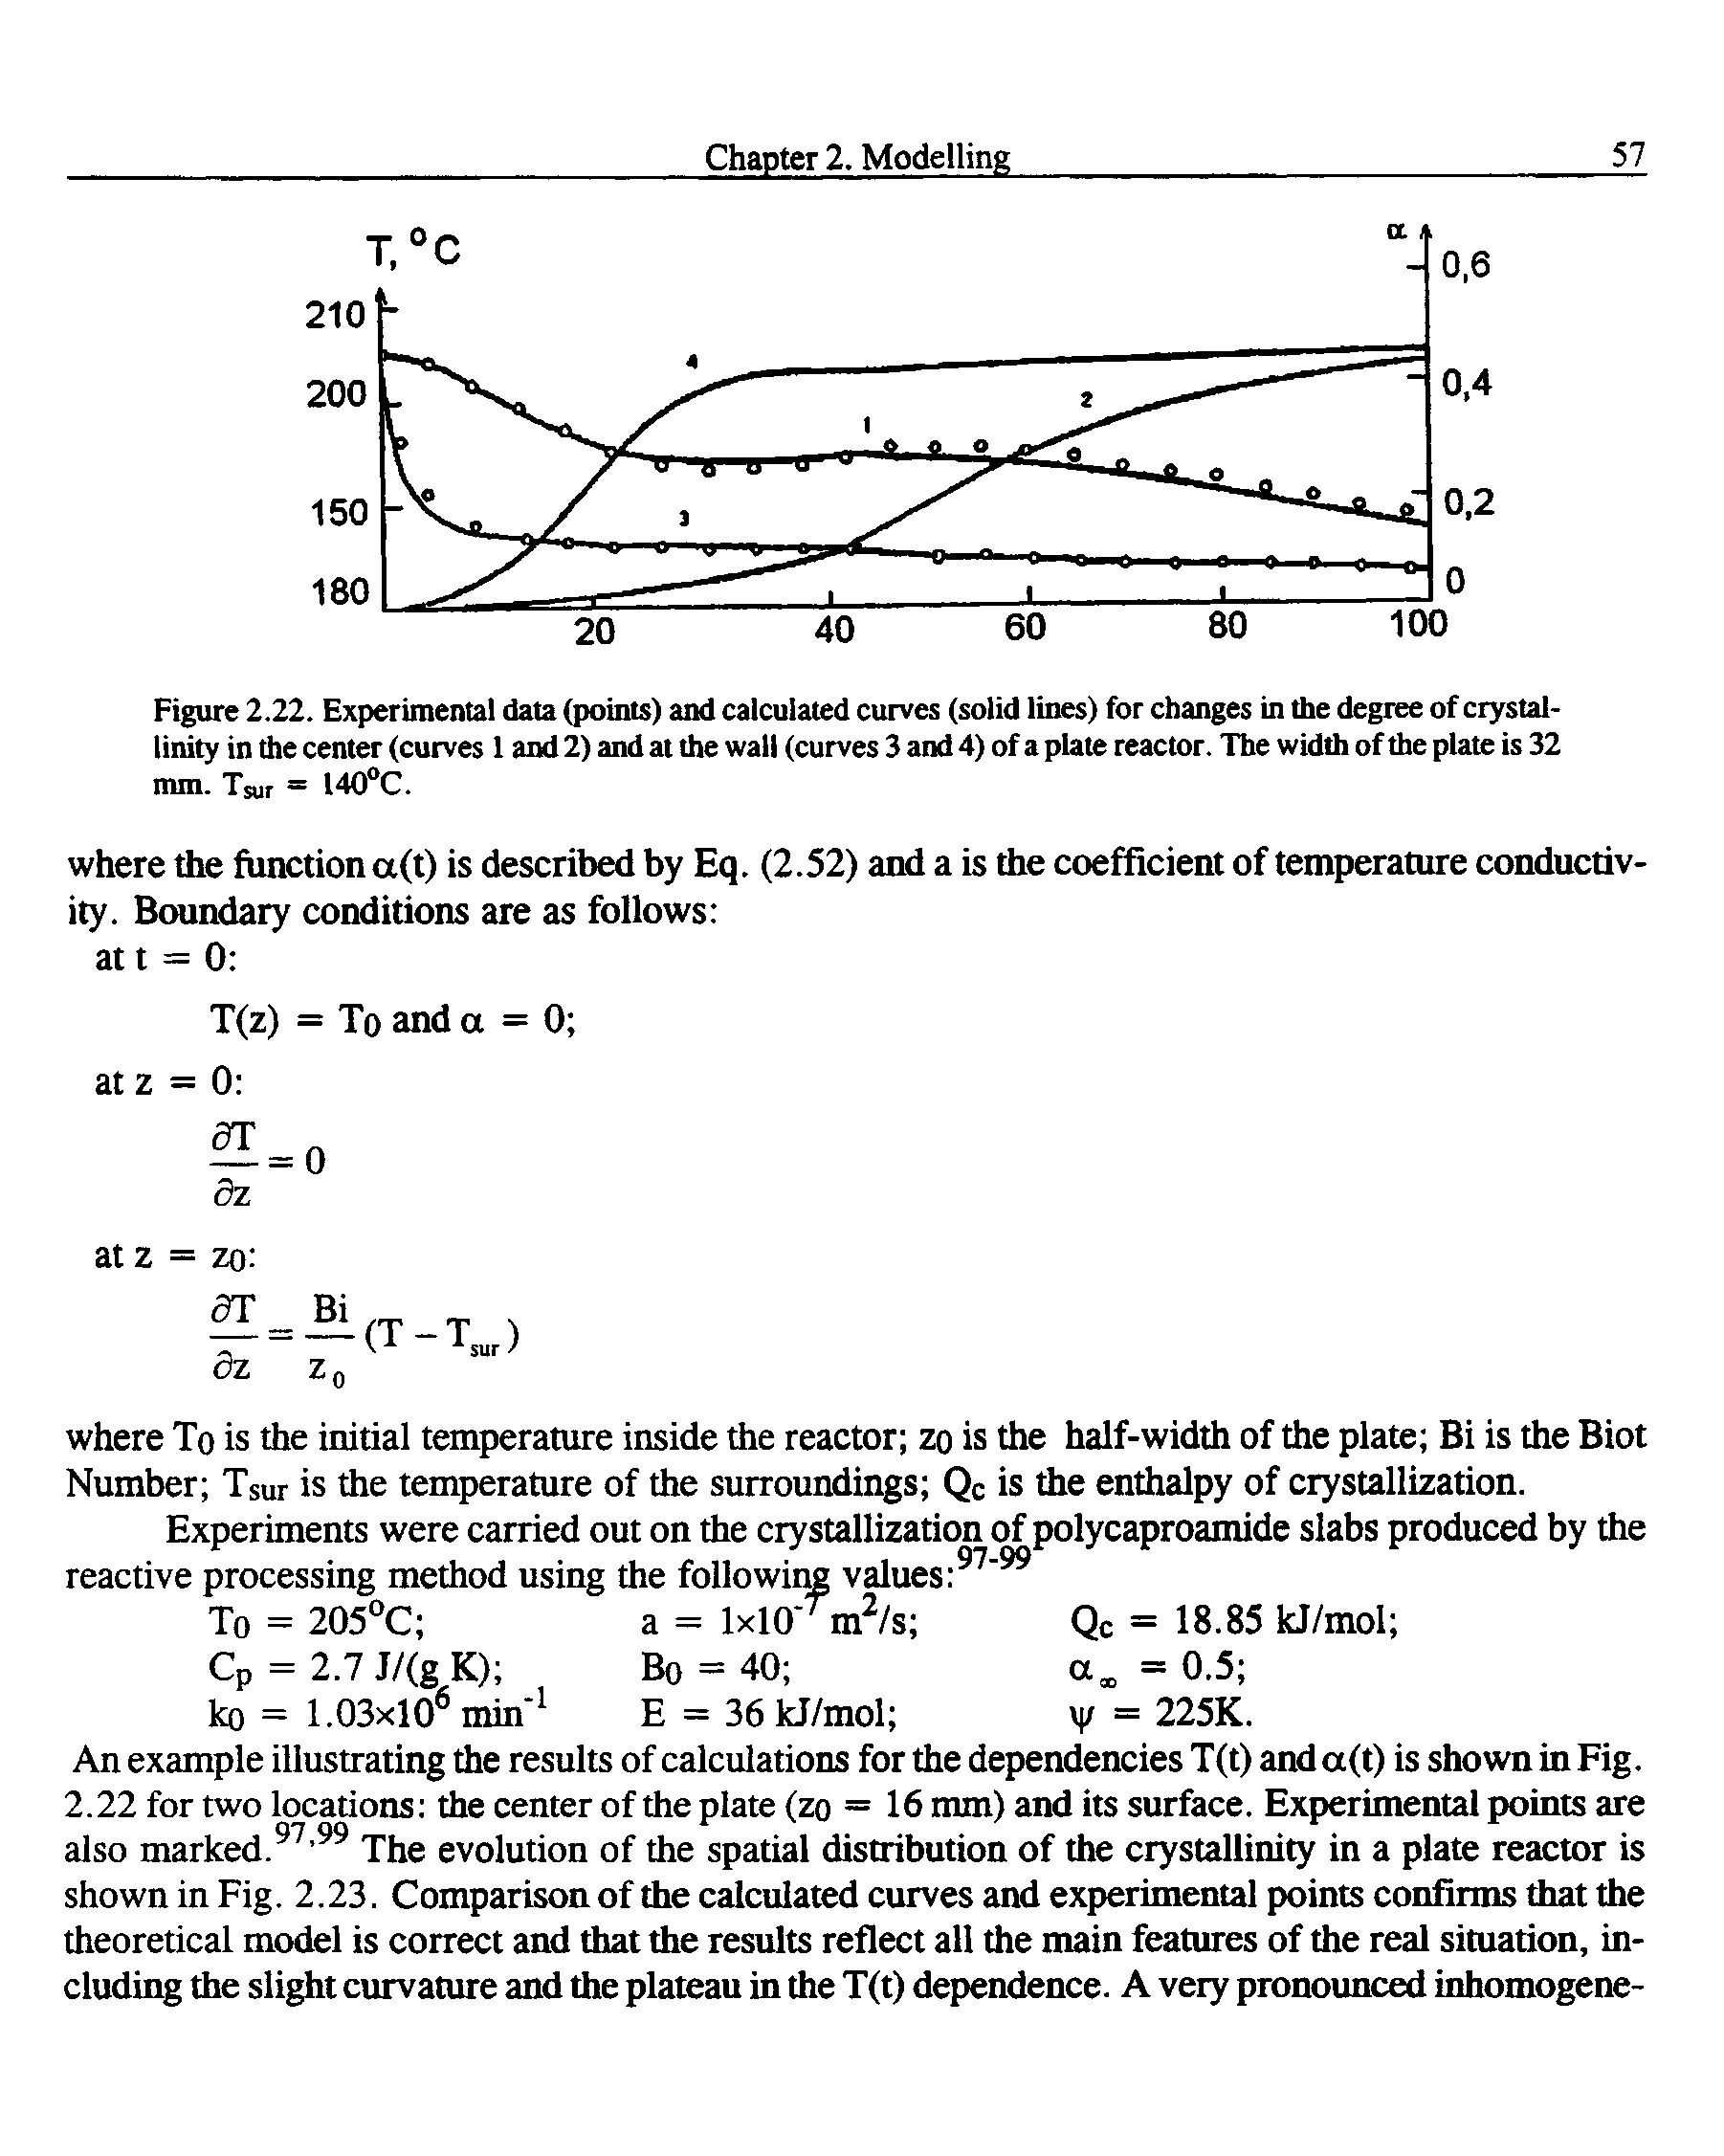 Figure 2.22. Experimental data (points) and calculated curves (solid lines) for changes in the degree of crystallinity in the center (curves 1 and 2) and at the wall (curves 3 and 4) of a plate reactor. The width of the plate is 32 mm. Tsur = 140°C.